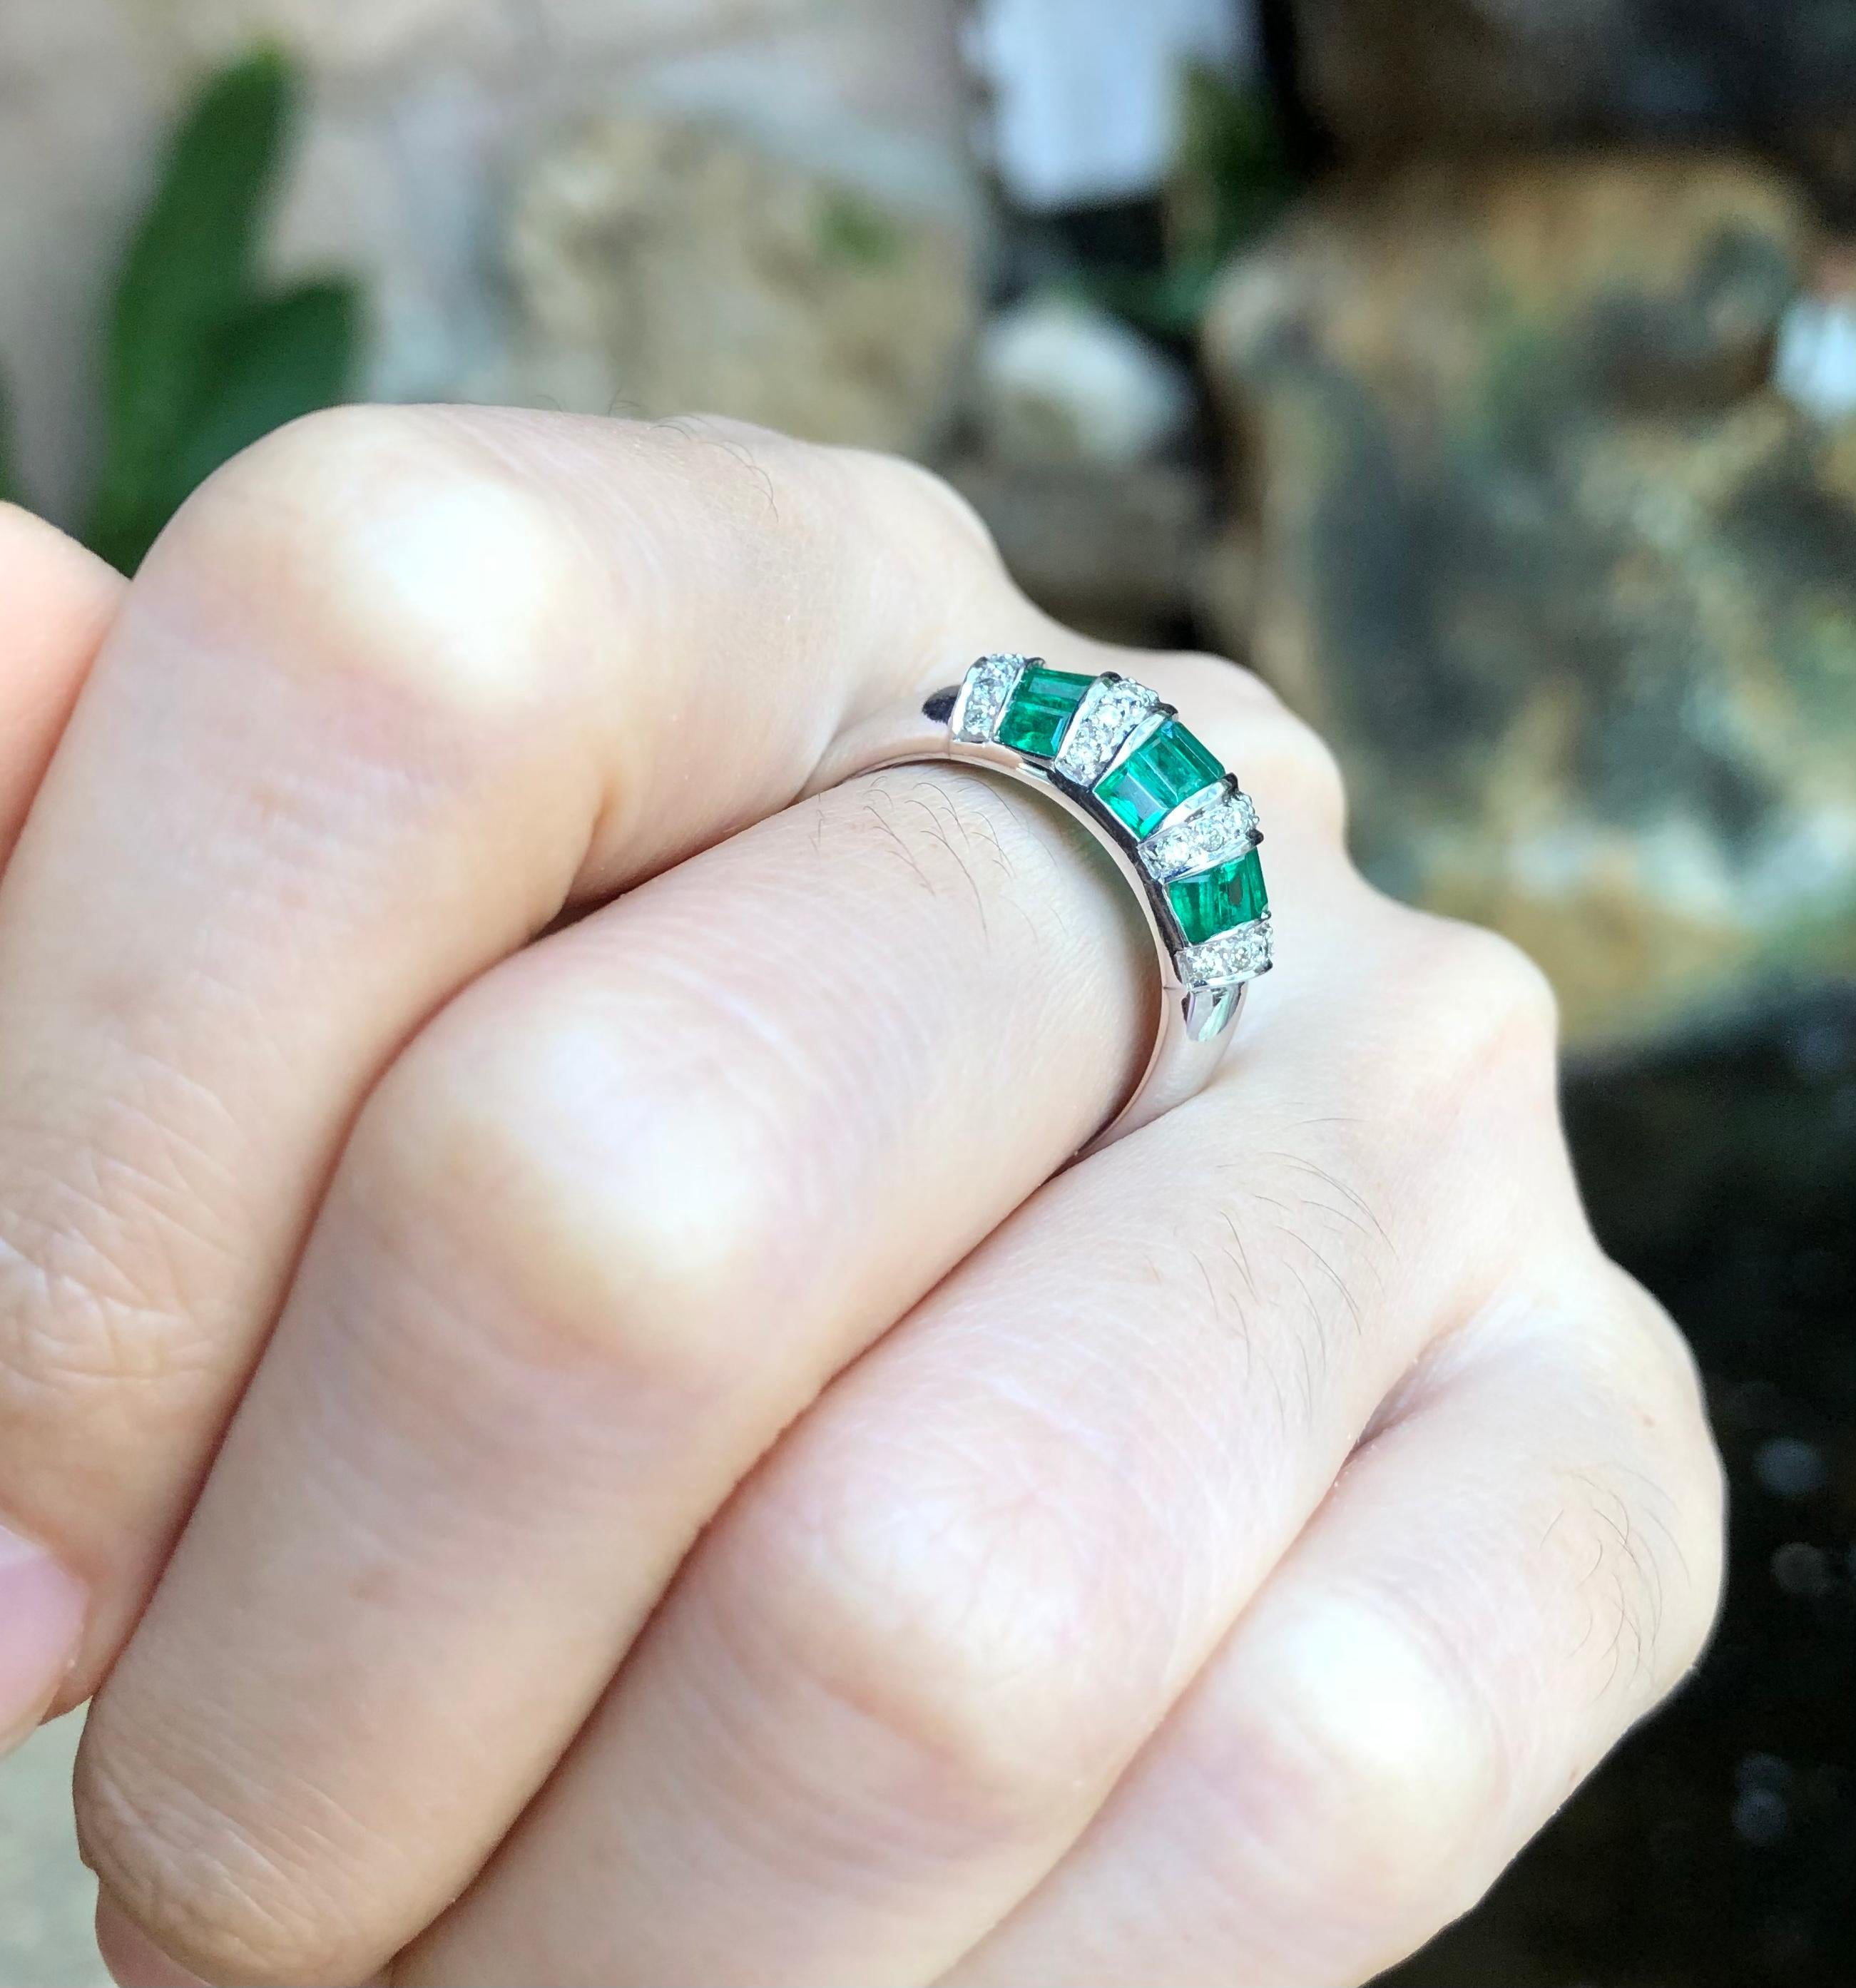 Emerald 1.27 carats with Diamond 0.19 carat Ring set in 18 Karat White Gold Settings

Width:  1.9 cm 
Length: 0.8 cm
Ring Size: 54
Total Weight: 4.4 grams

